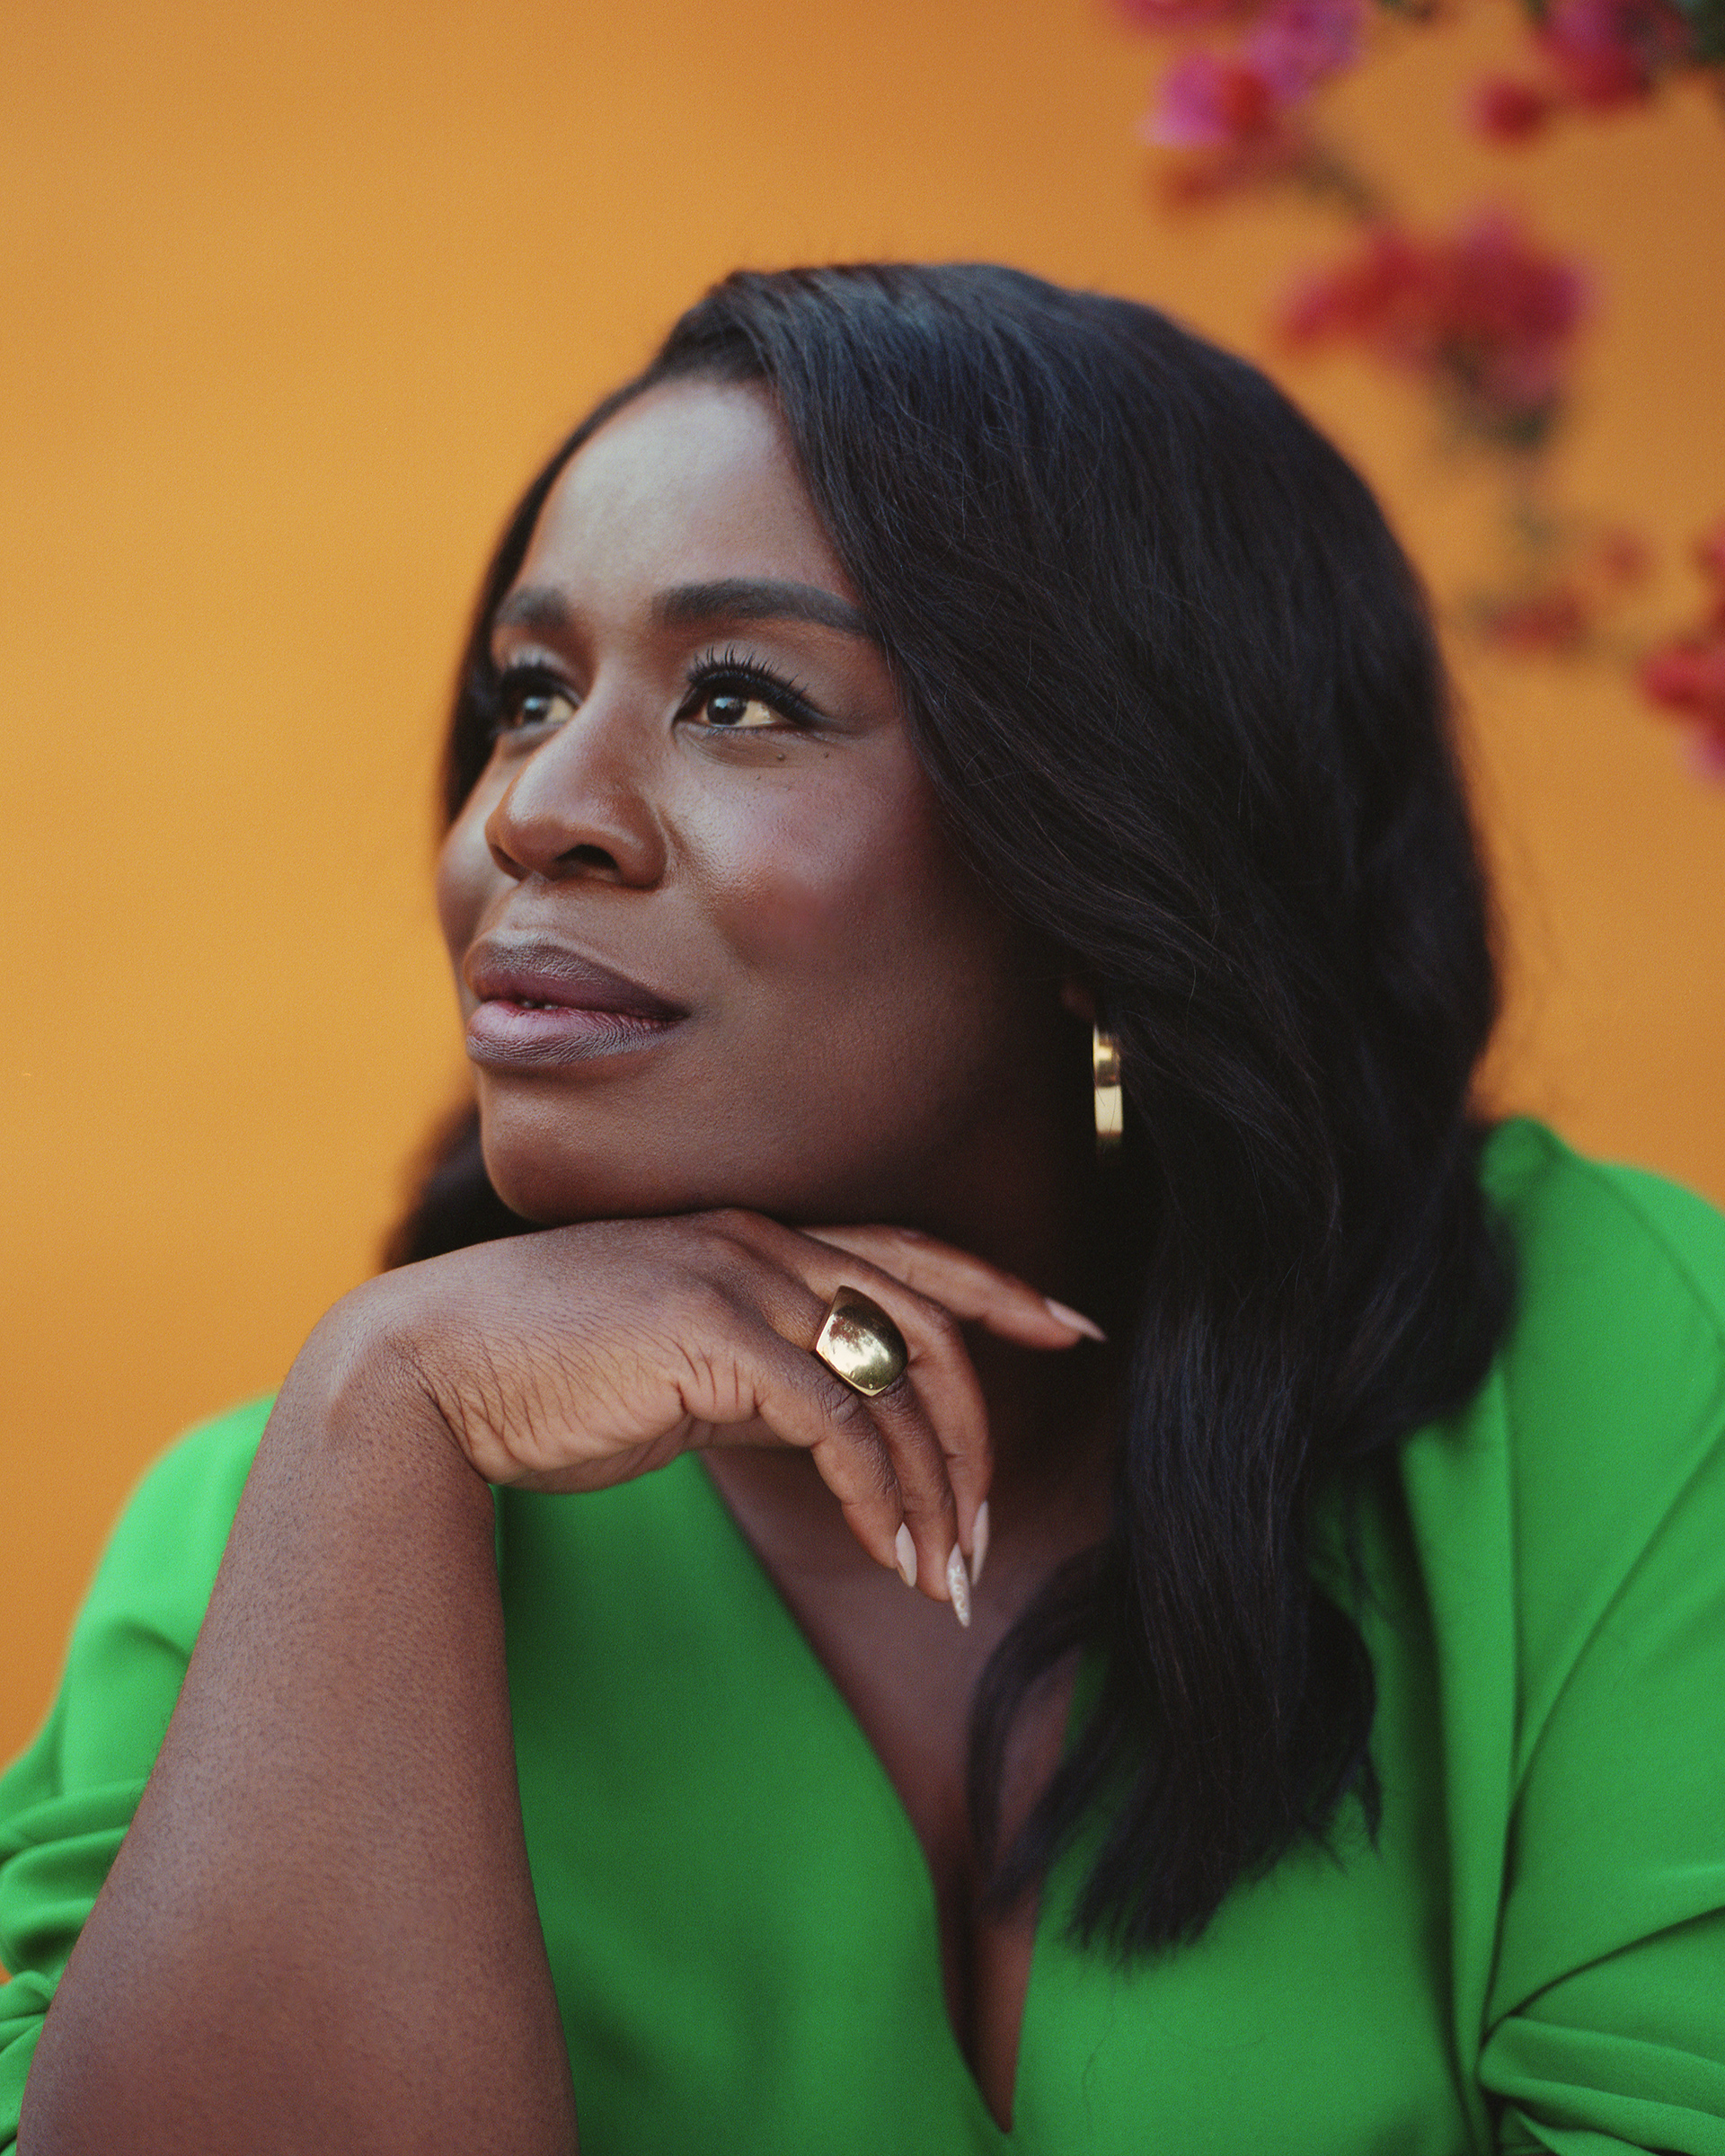 Actor Uzo Aduba opens up about grief, mental health and playing a psychologist in HBO's 'In Treatment.' (Erik Carter for TIME)